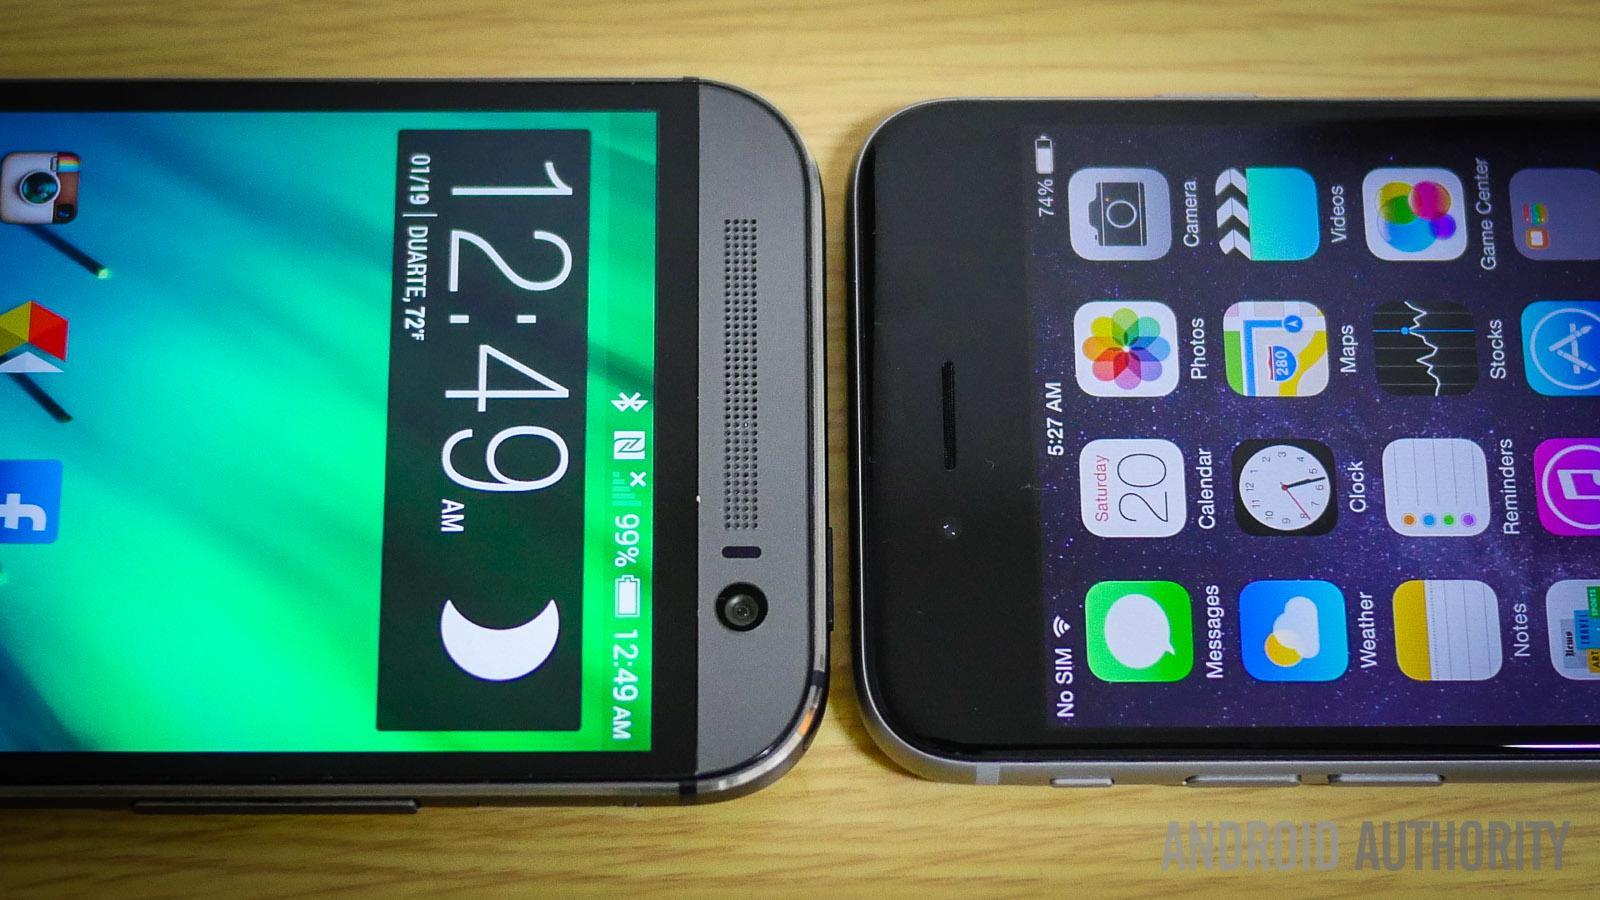 iphone 6 plus vs htc one m8 quick look aa (3 of 14)